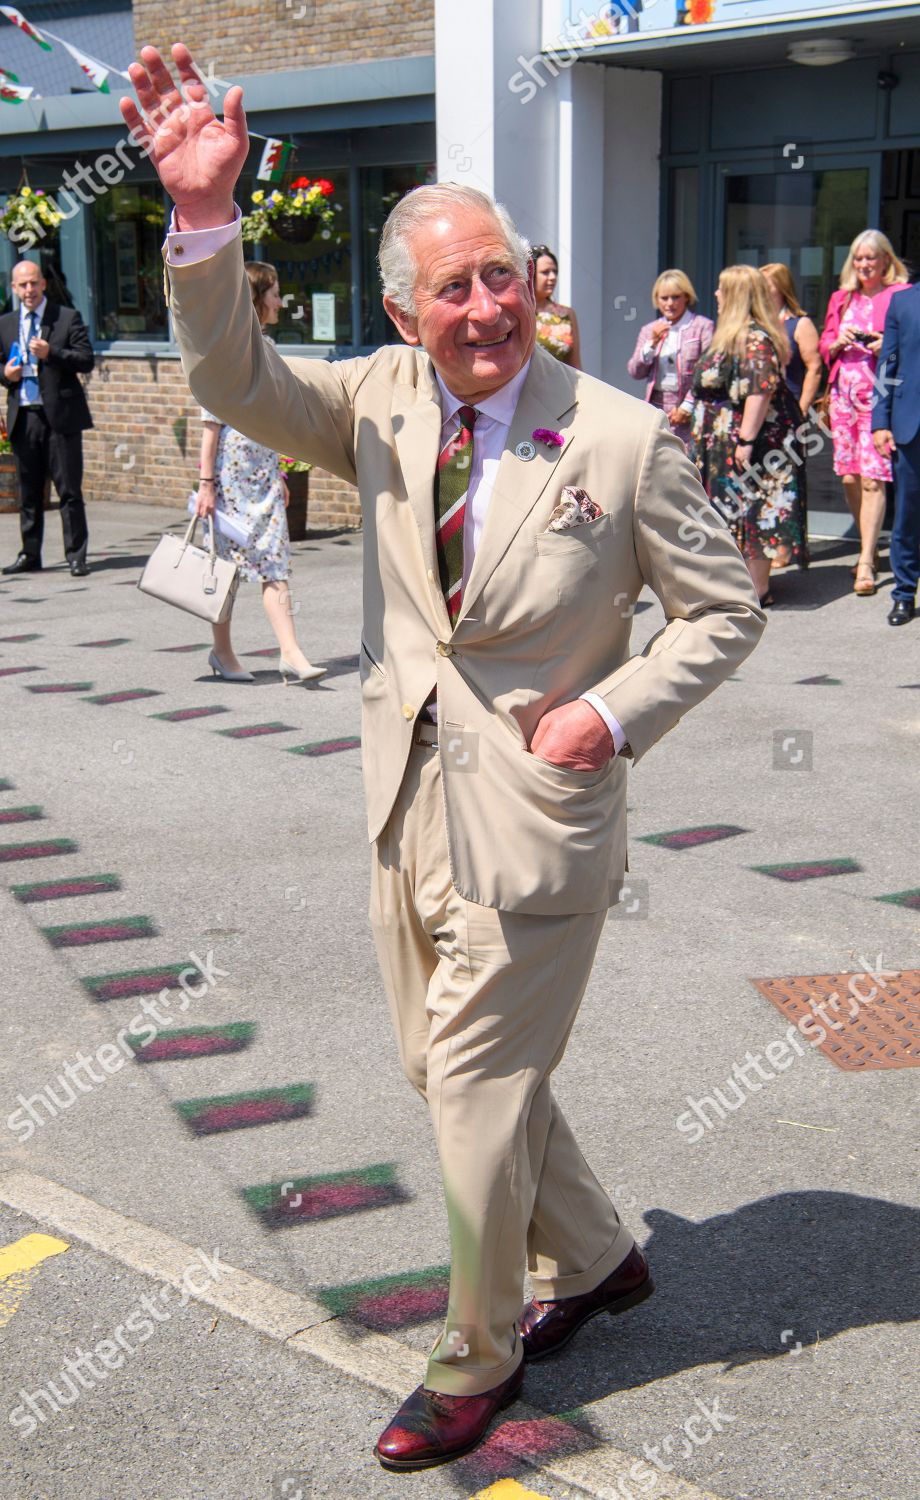 prince-charles-and-camilla-duchess-of-cornwall-visit-to-wales-uk-shutterstock-editorial-10327726cm.jpg